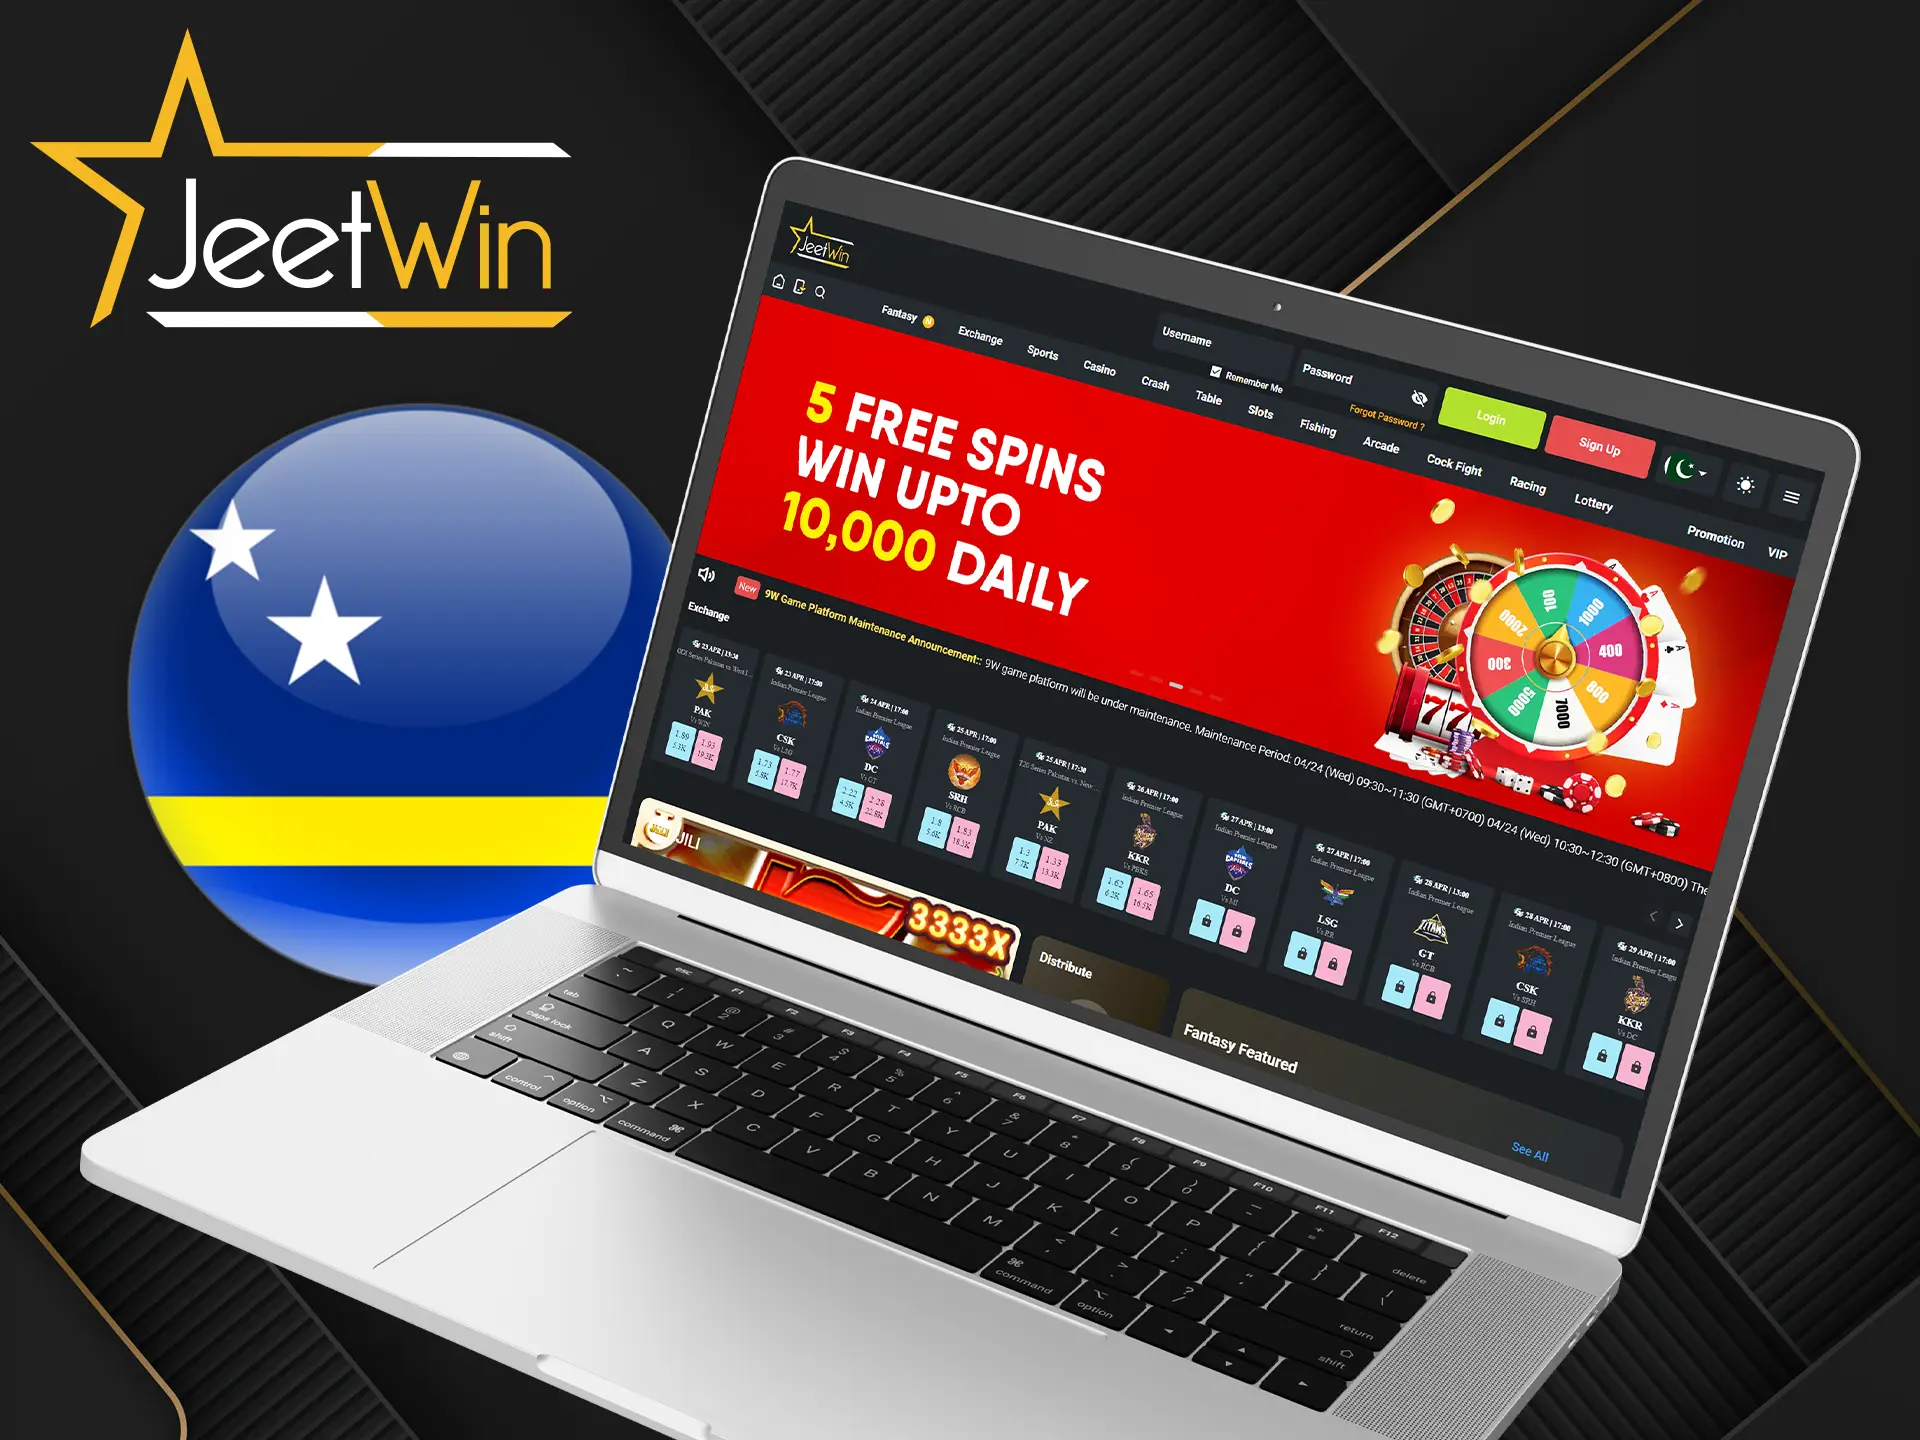 JeetWin operates under a license and offers only safe sports betting and casino games.